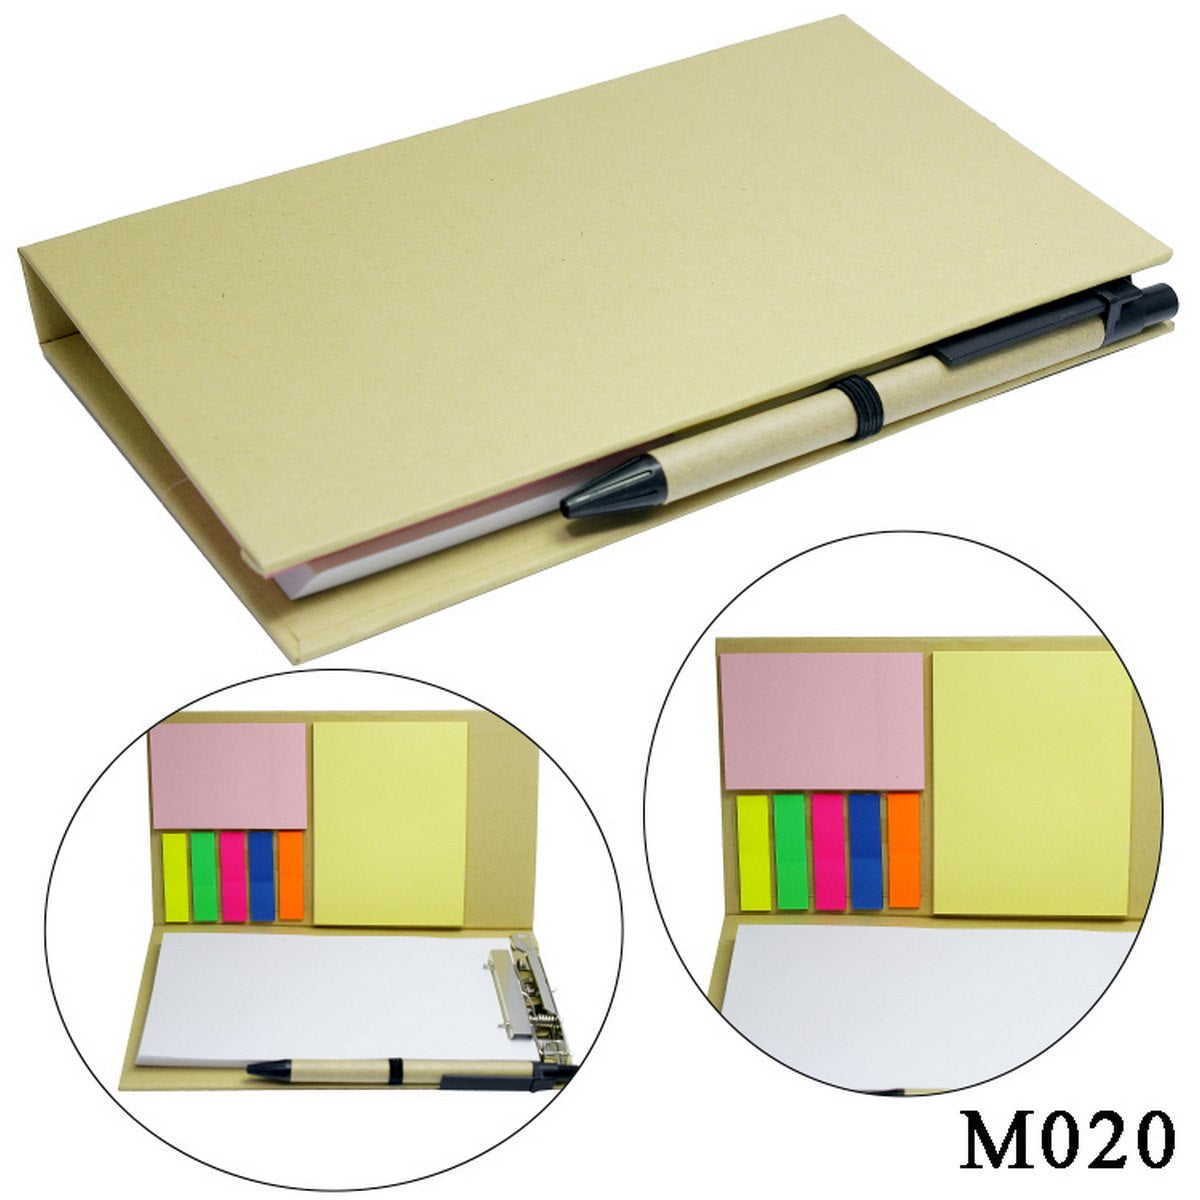 jags-mumbai Sticky Notes Memo Pad with pen and sticky notes (Bigger size)